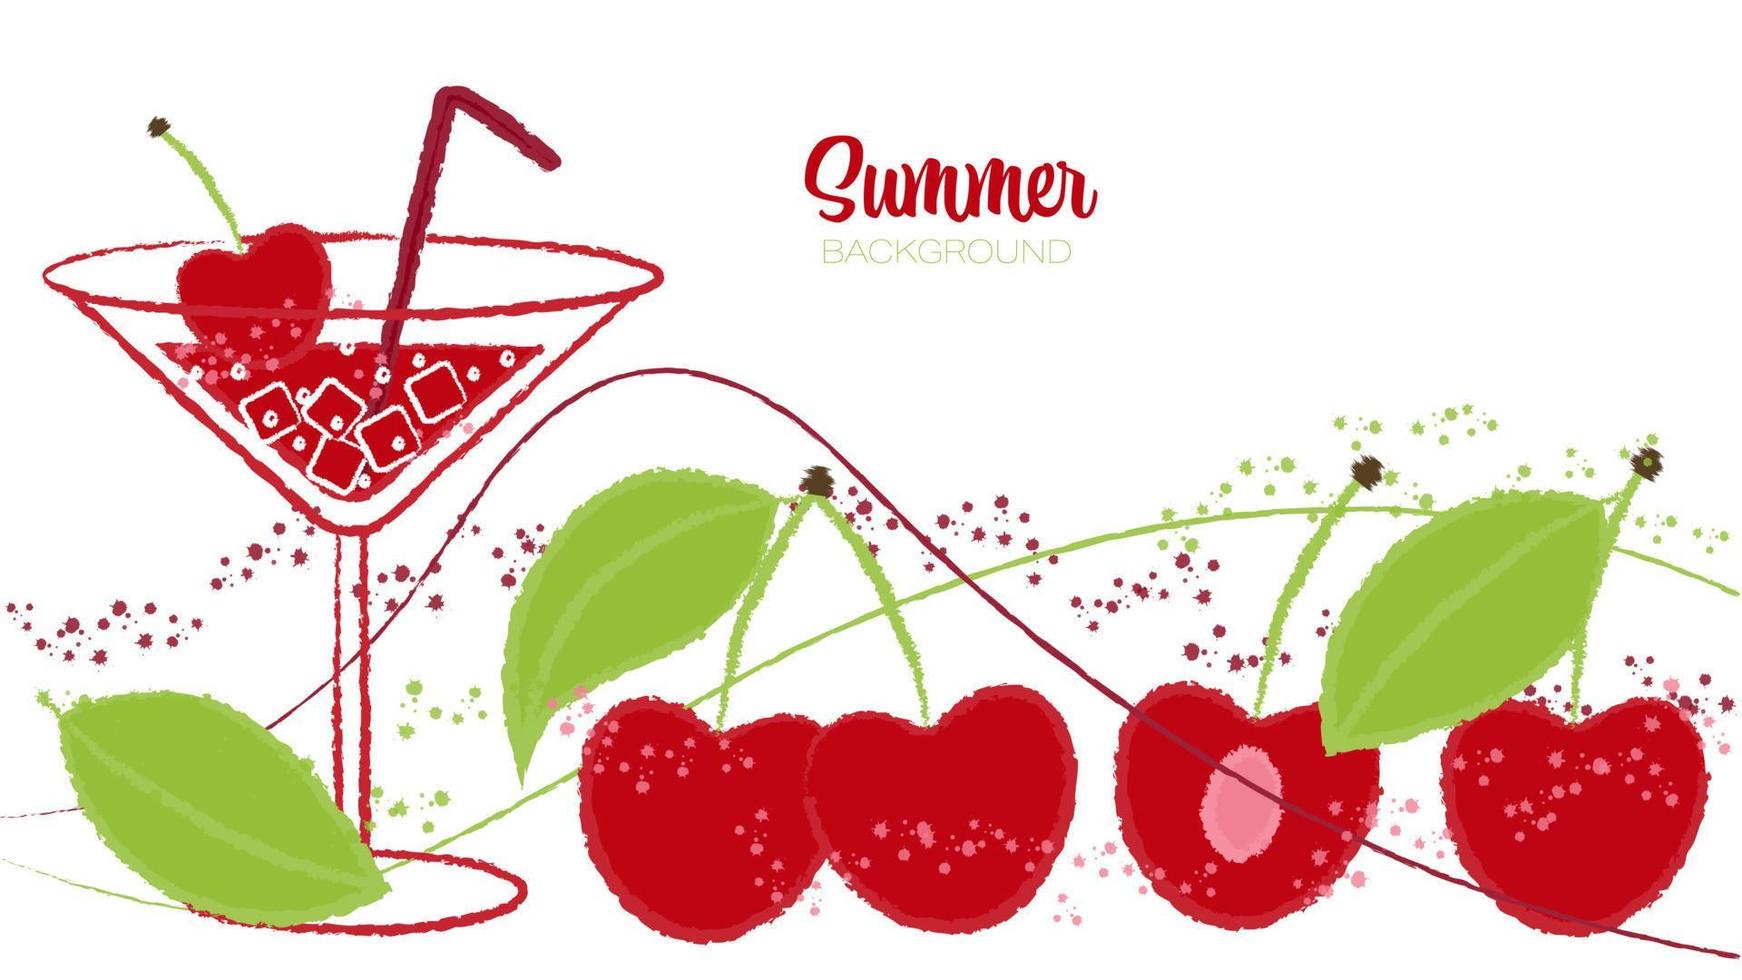 Sweet Juicy Summer Vector Background With Bright Cherries, Cocktail, Abstract Splashes and Brush Strokes